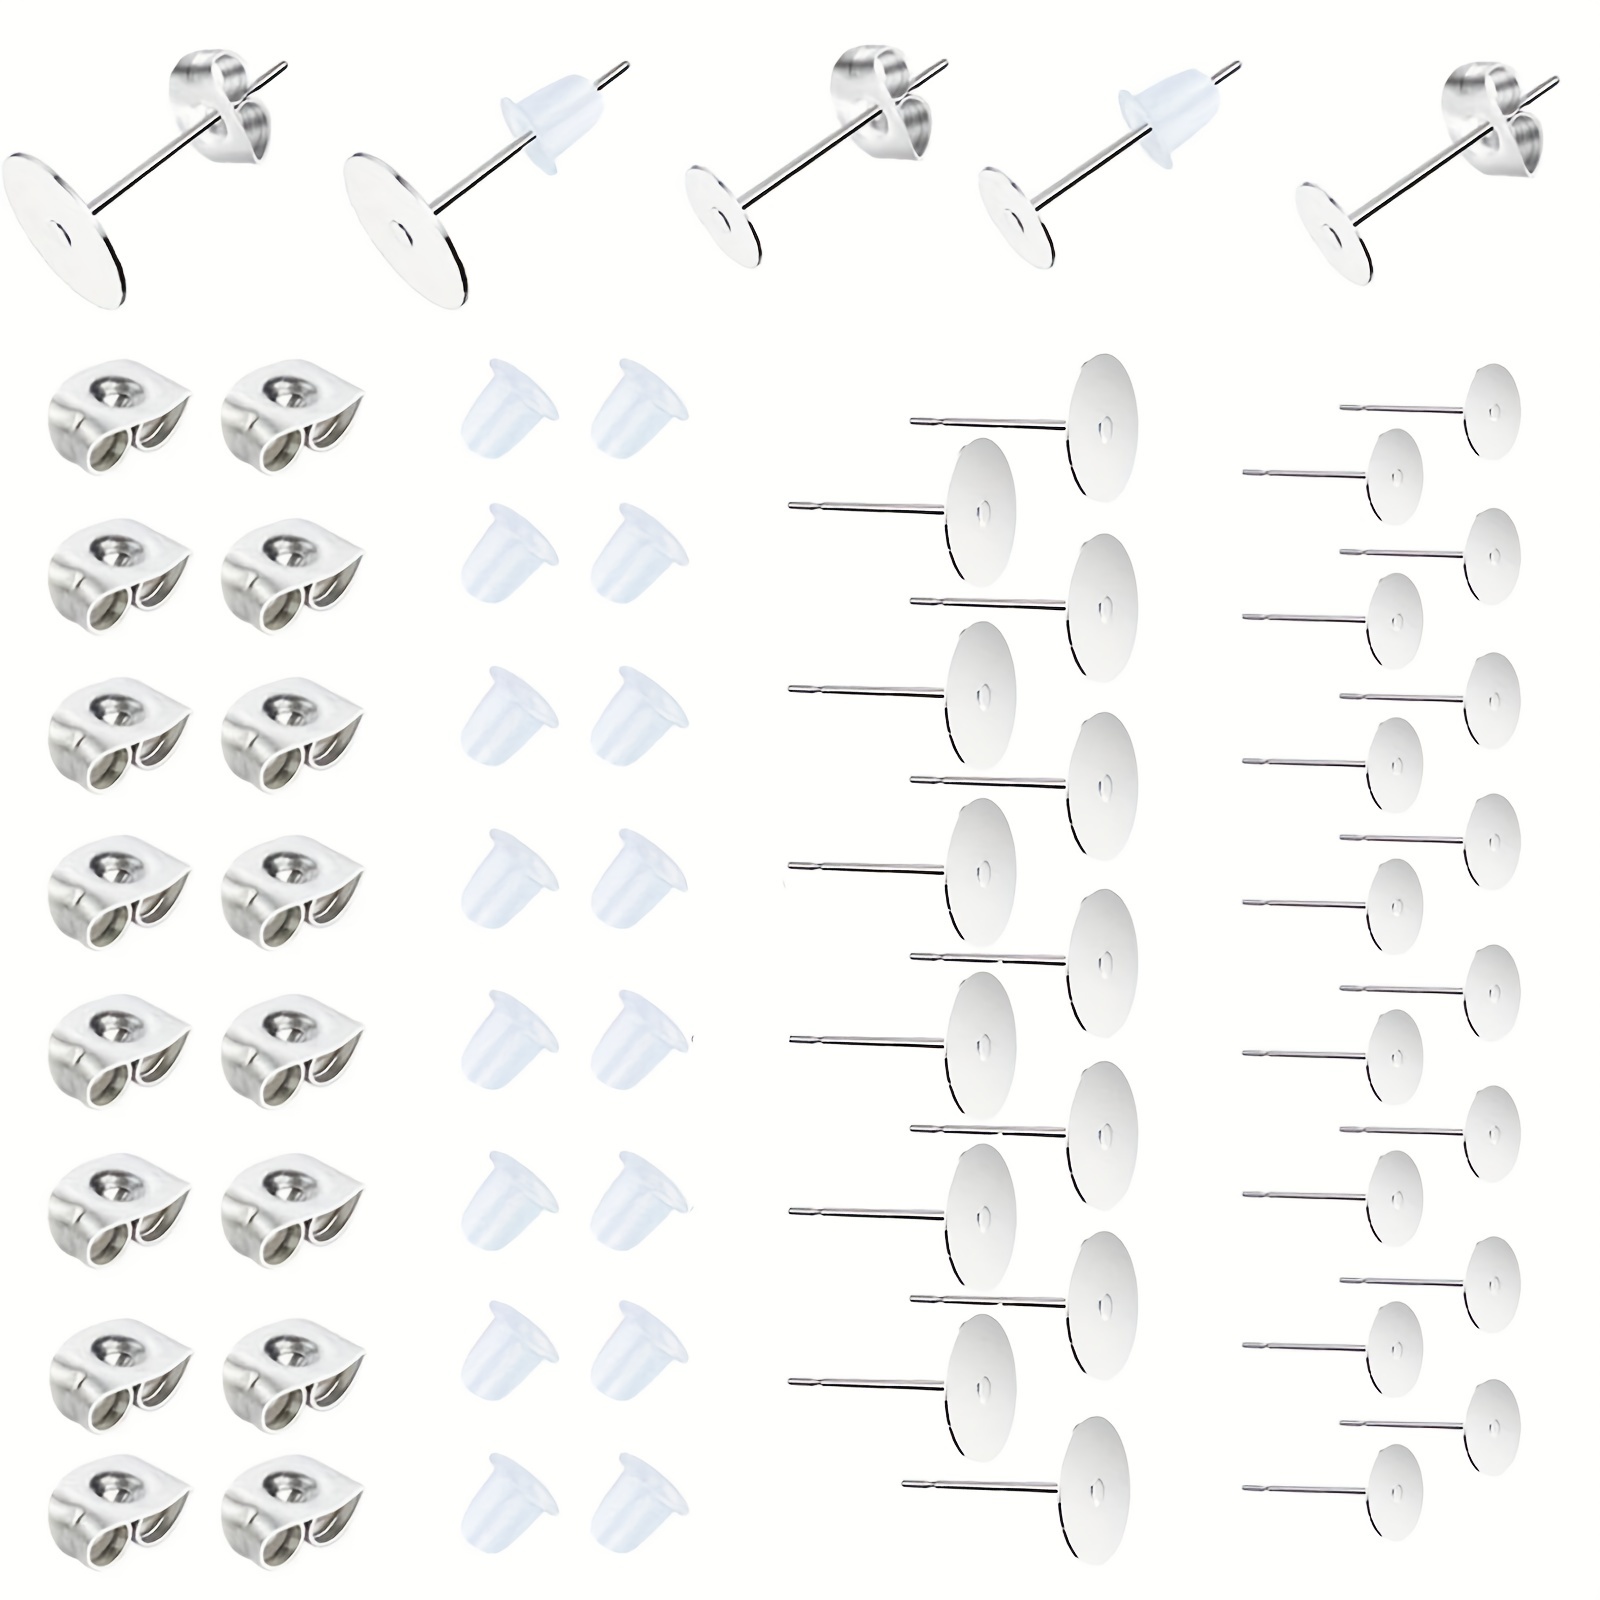 12Pcs Earring Backs 18K White Gold Earring Backs Replacements for Studs  Hoops Fish Hook Droopy Hypoallergenic Soft Secure Safety Earrings Backings